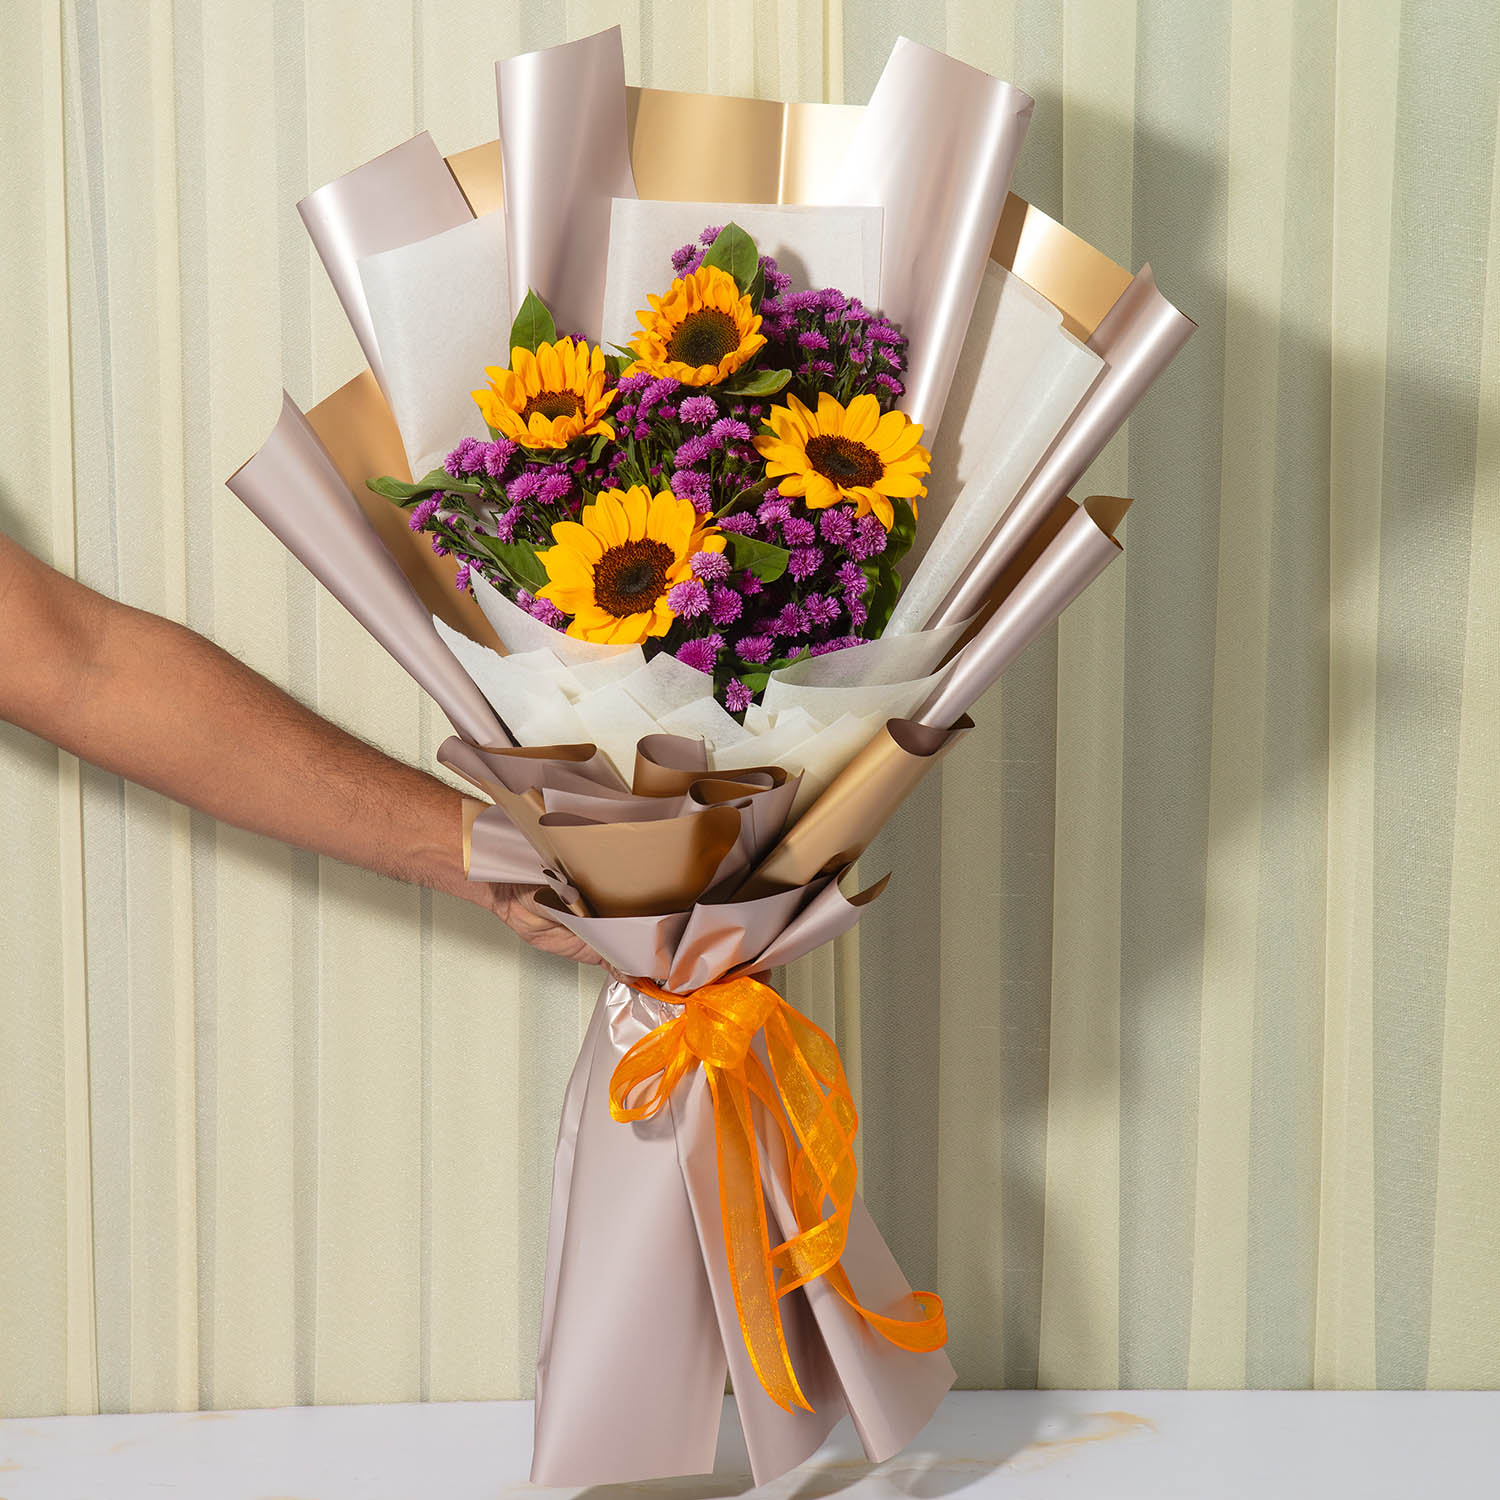 online delivery for flowers - sunflowers